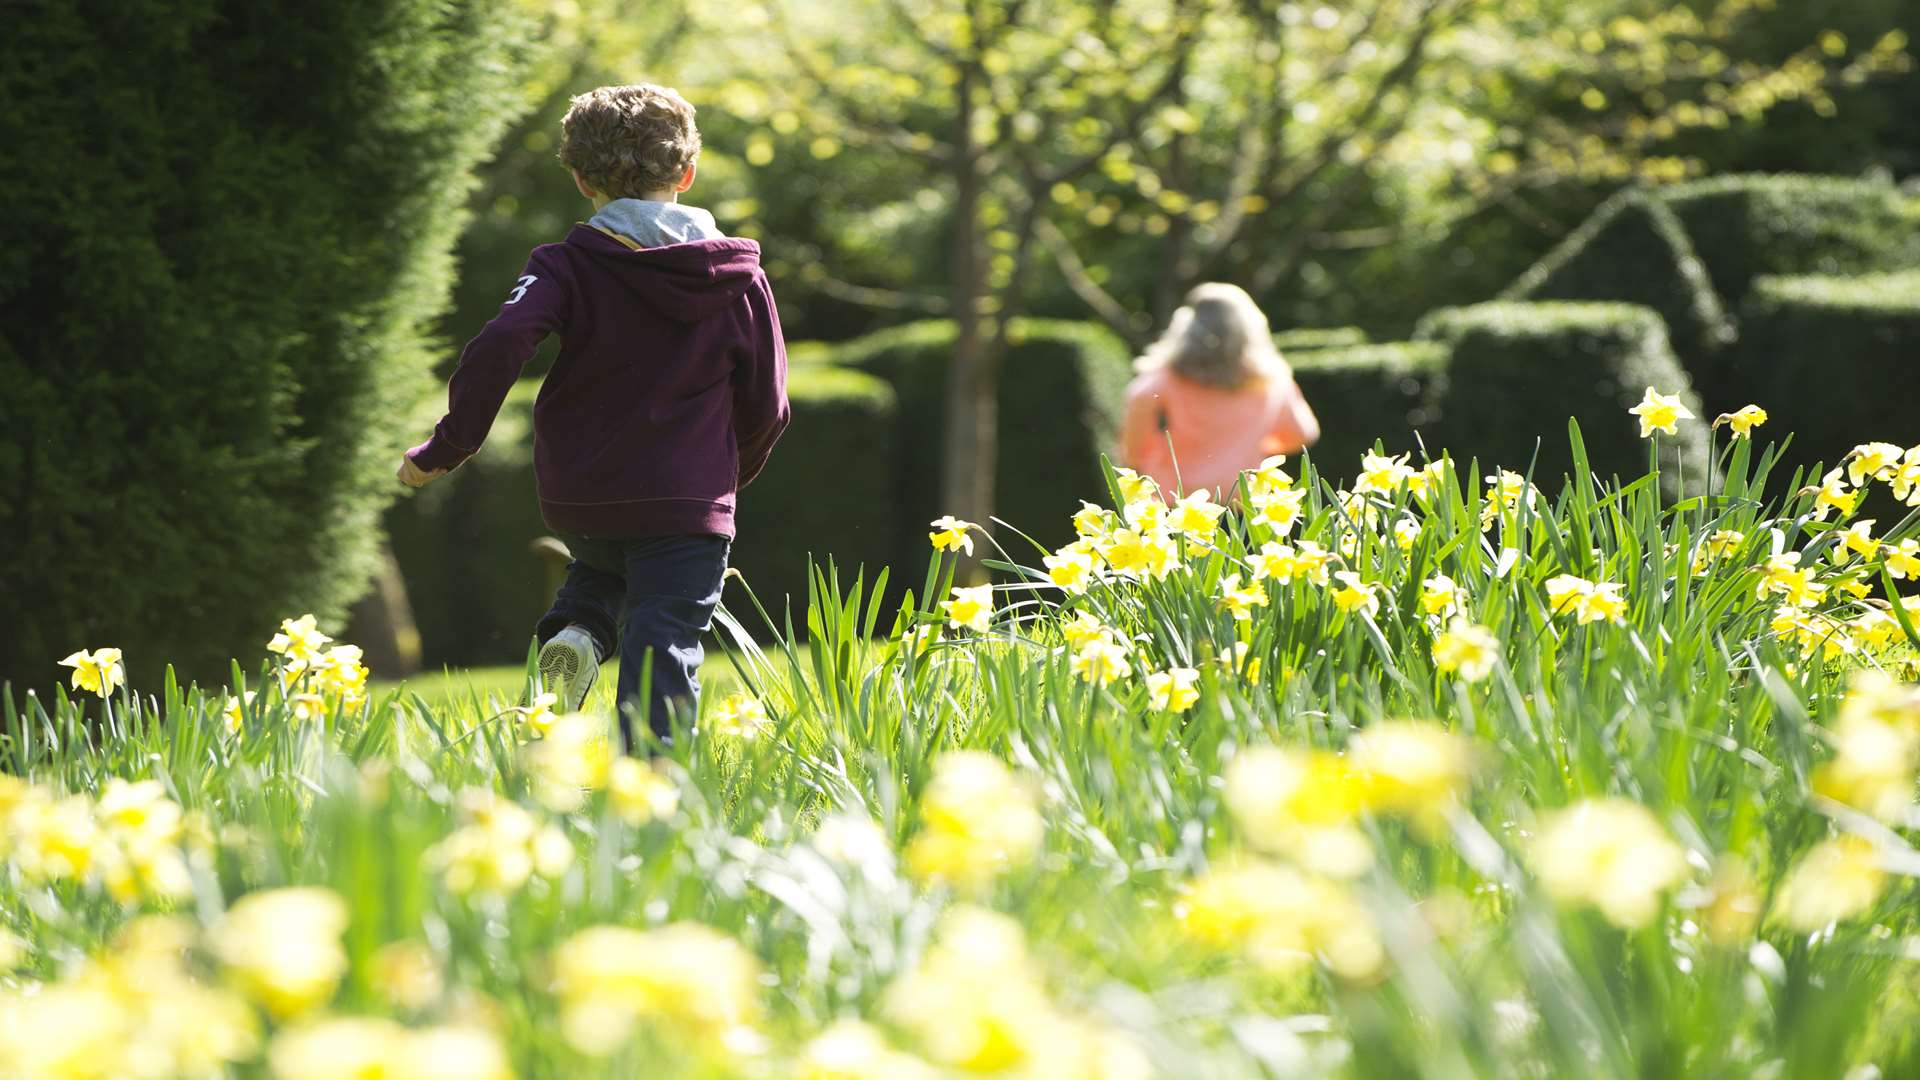 Explore at National Trust property this Easter